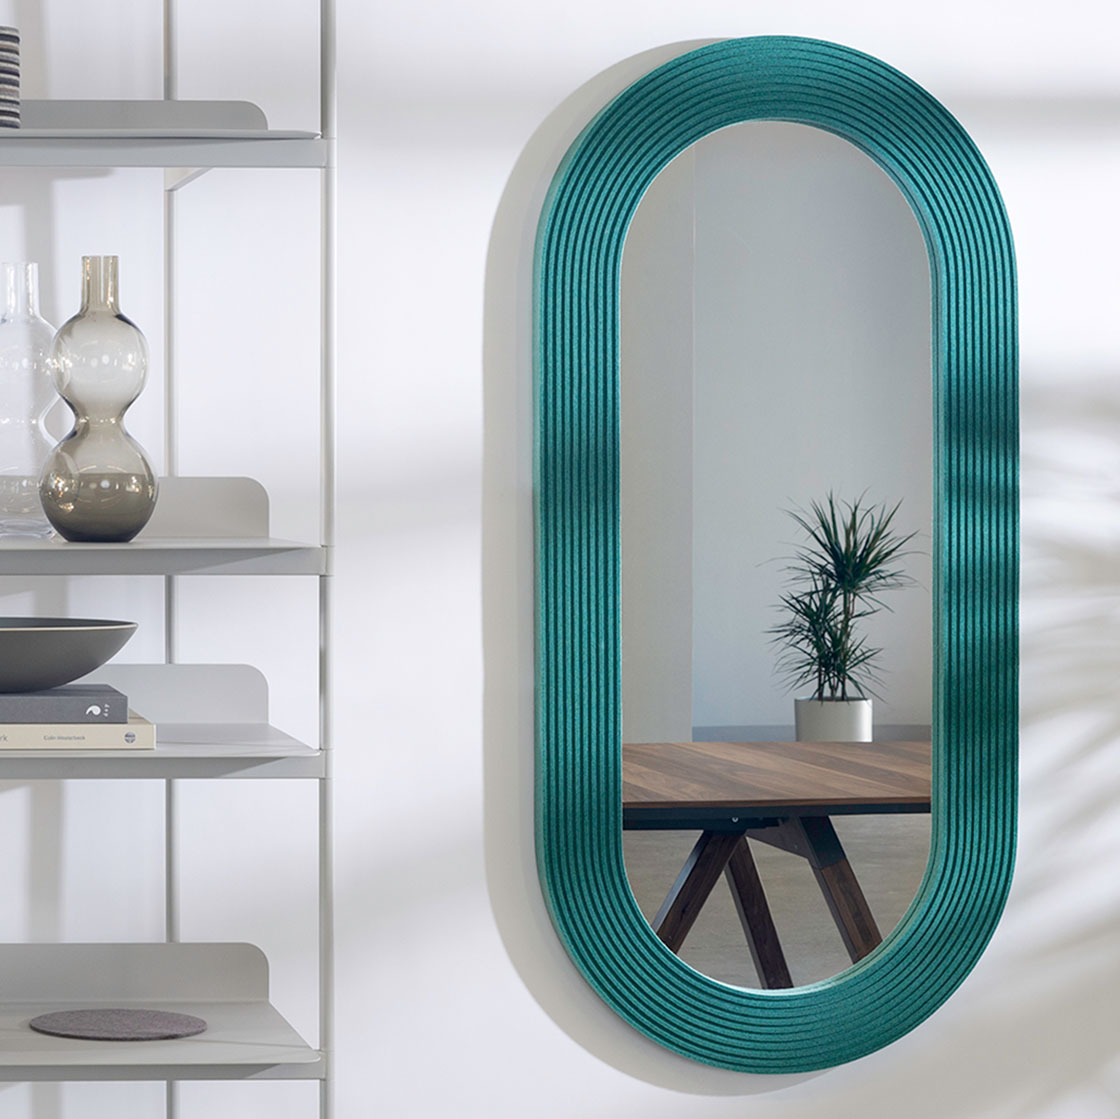 Pill shaped mirror framed with teal ribbed felt. It is reflecting a table and plant and is hung next to a shelving unit.